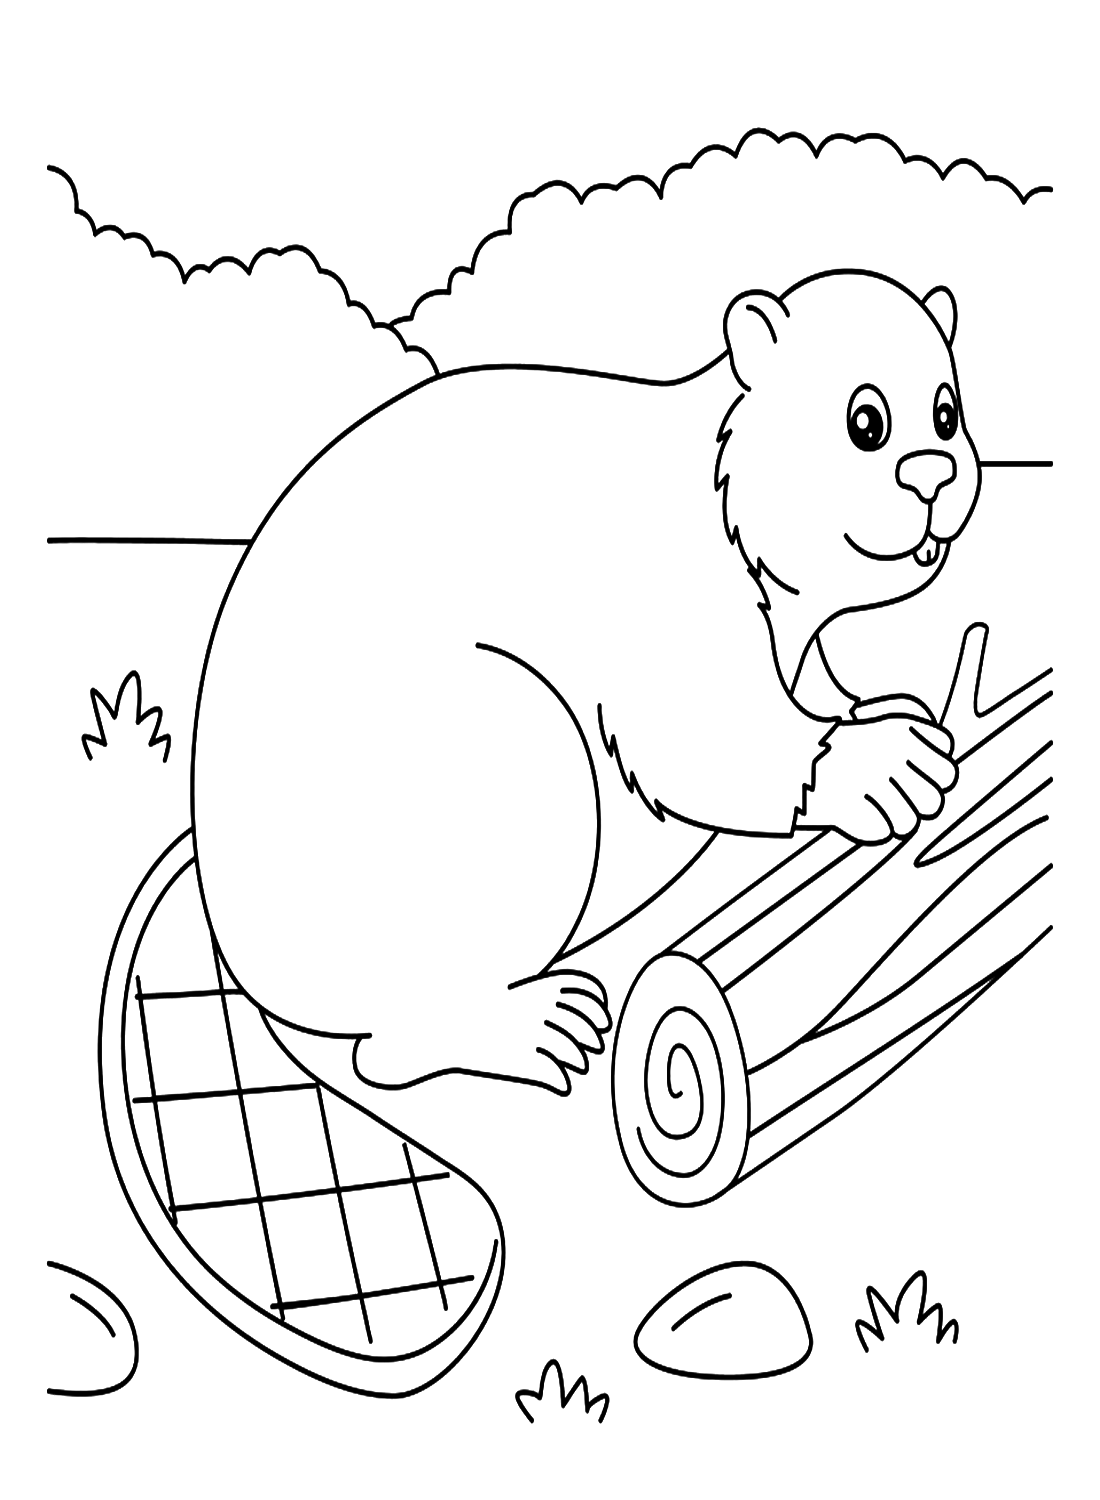 Simple Beaver Coloring Page - Free Printable Coloring Pages